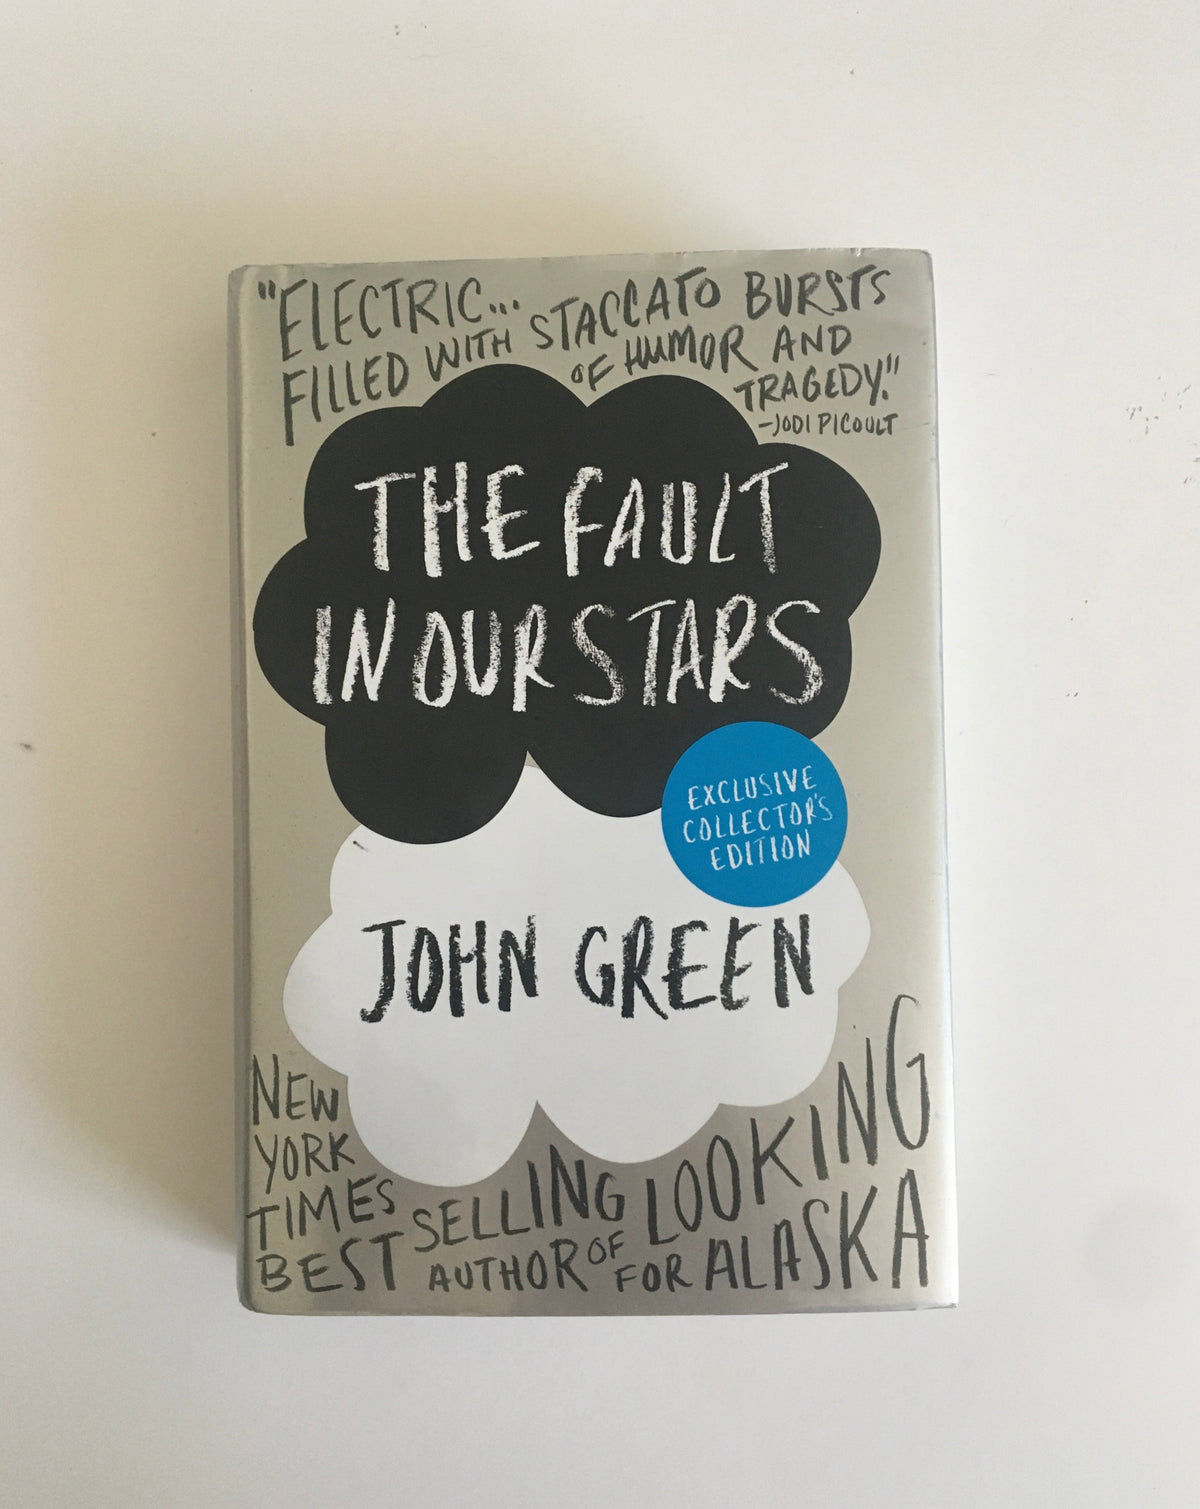 The Fault in Our Stars by John Green